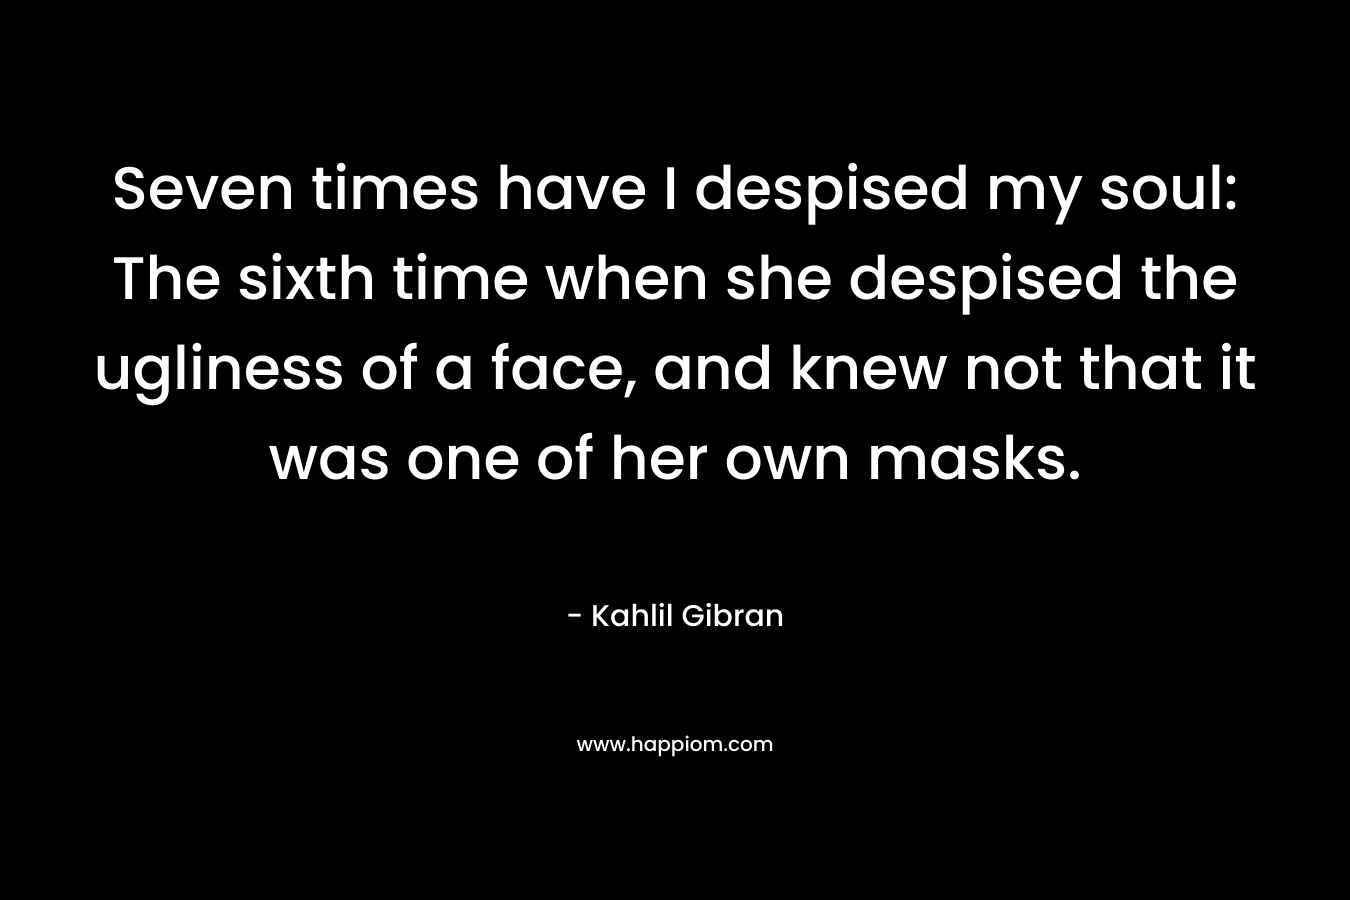 Seven times have I despised my soul: The sixth time when she despised the ugliness of a face, and knew not that it was one of her own masks.